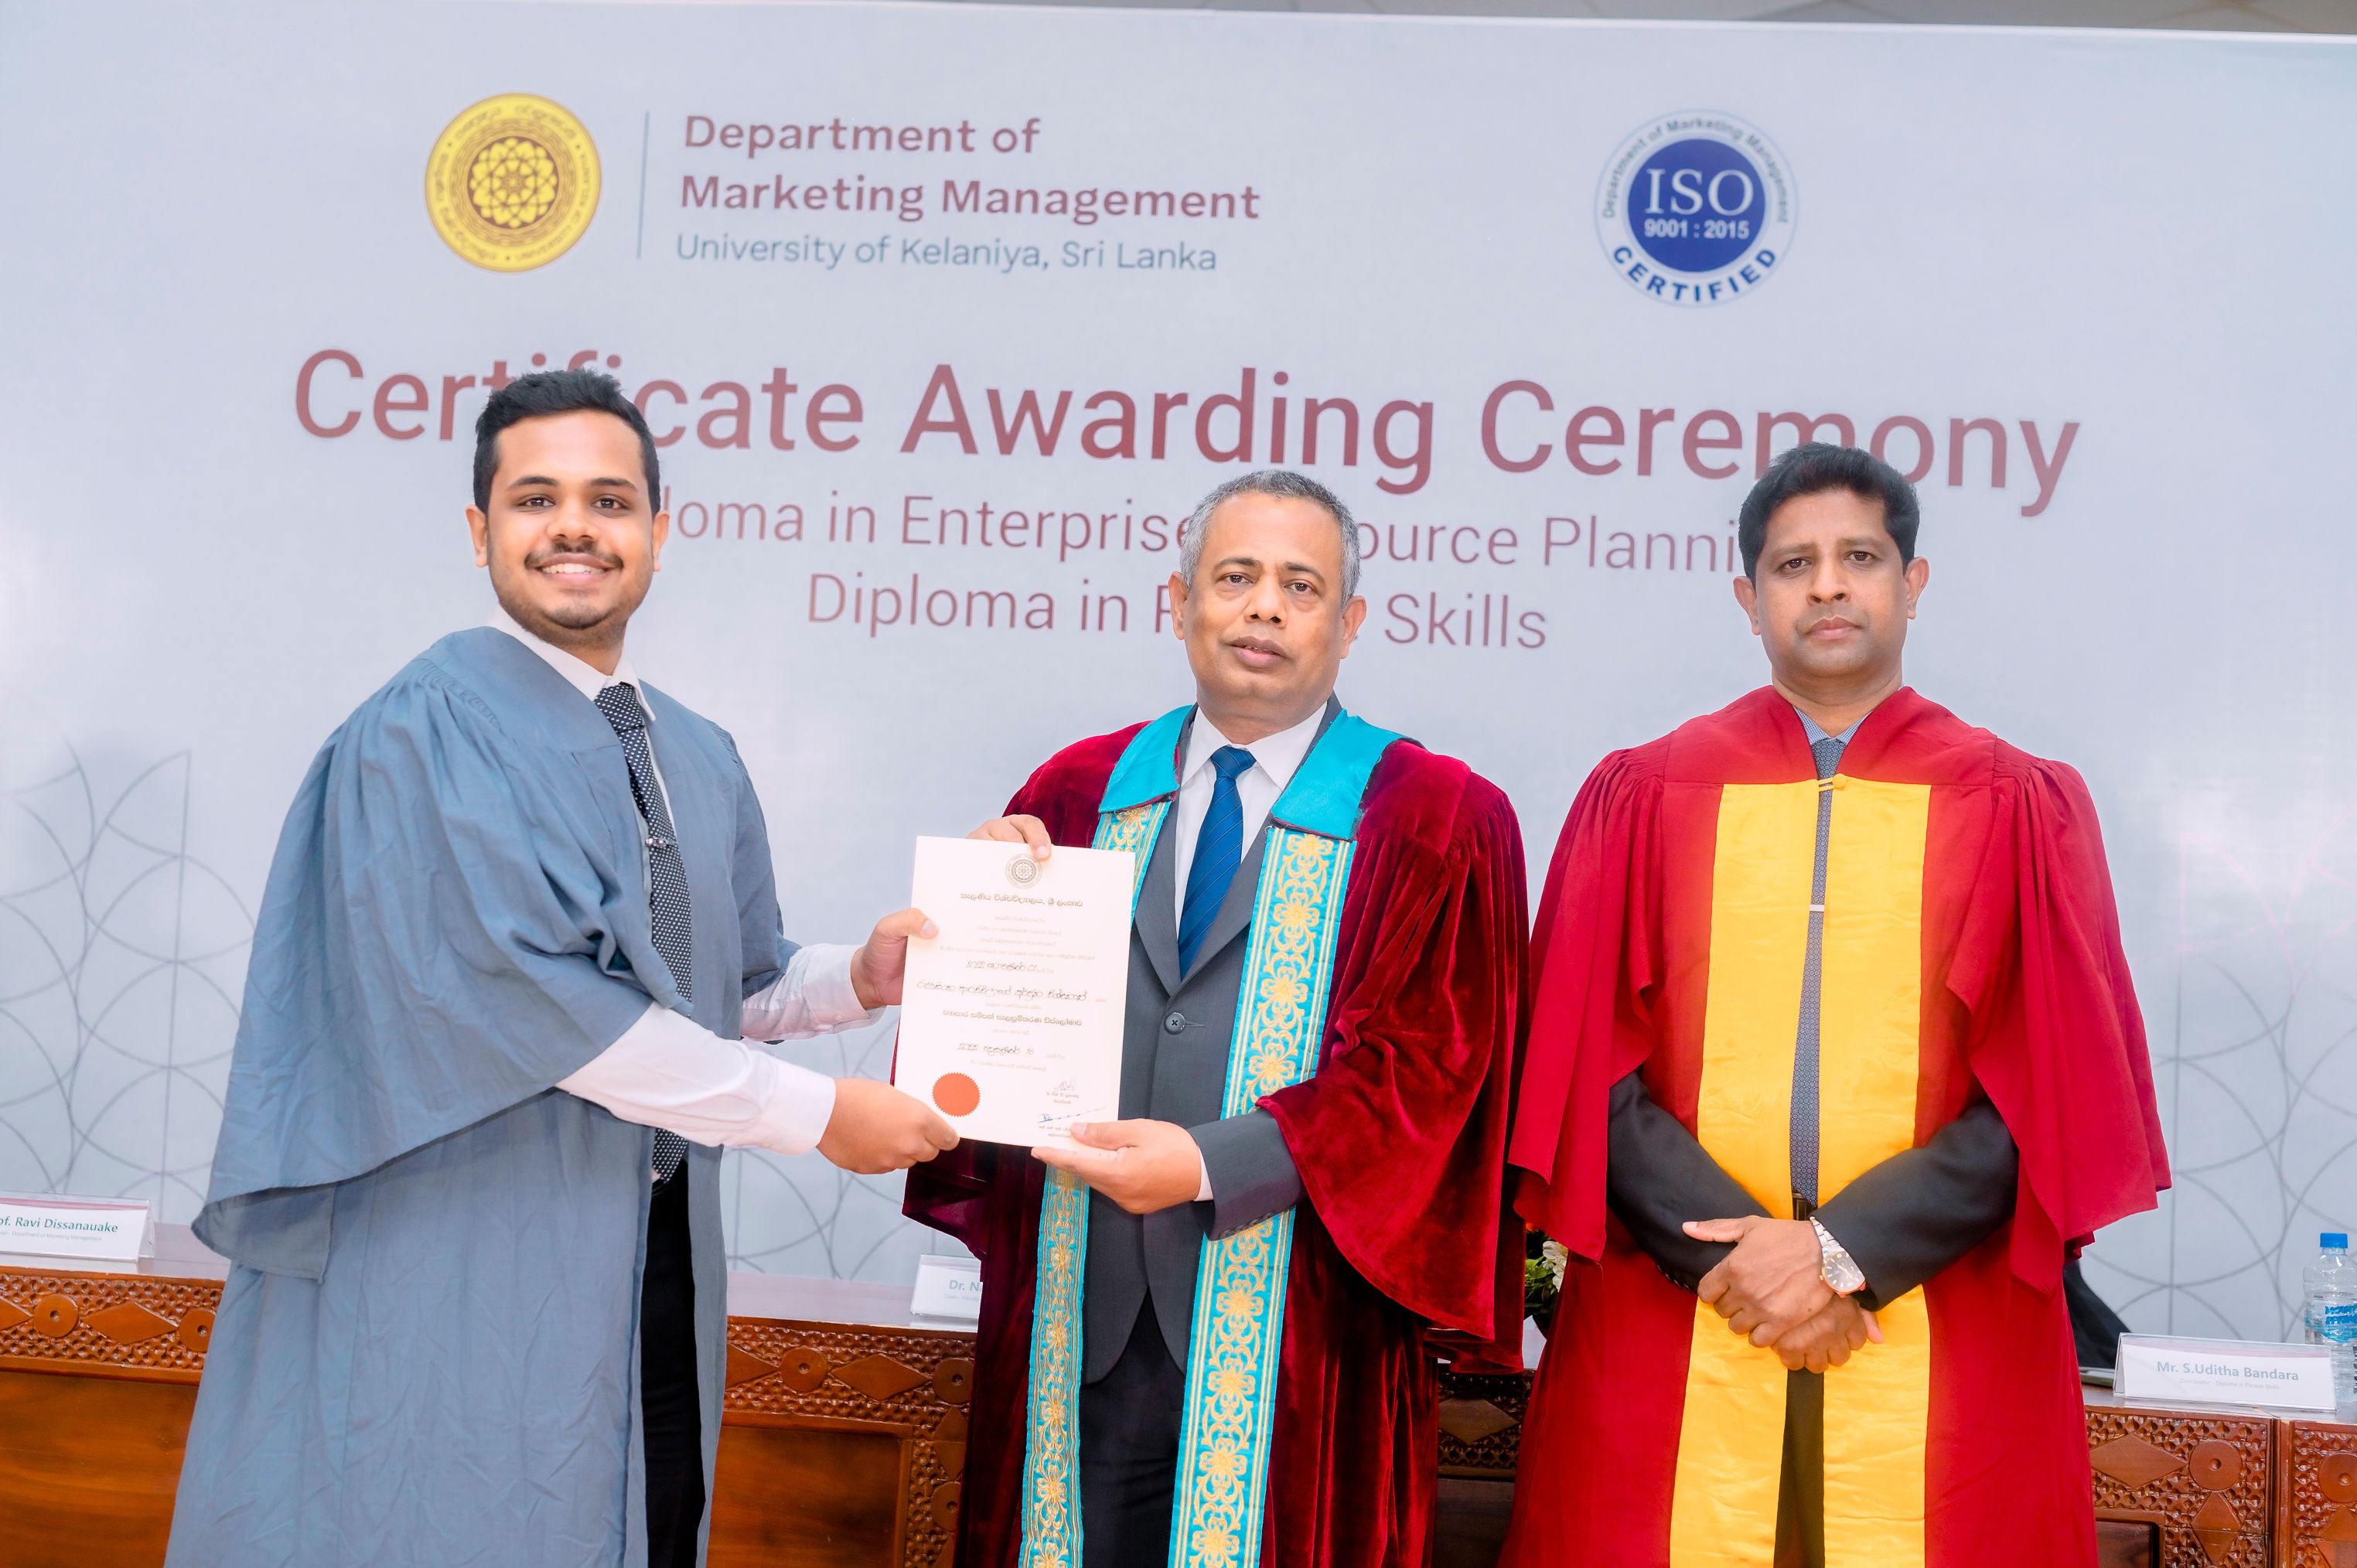 Diploma Awarding Ceremony of Diploma in People Skills and Diploma in Enterprise Resource Planning